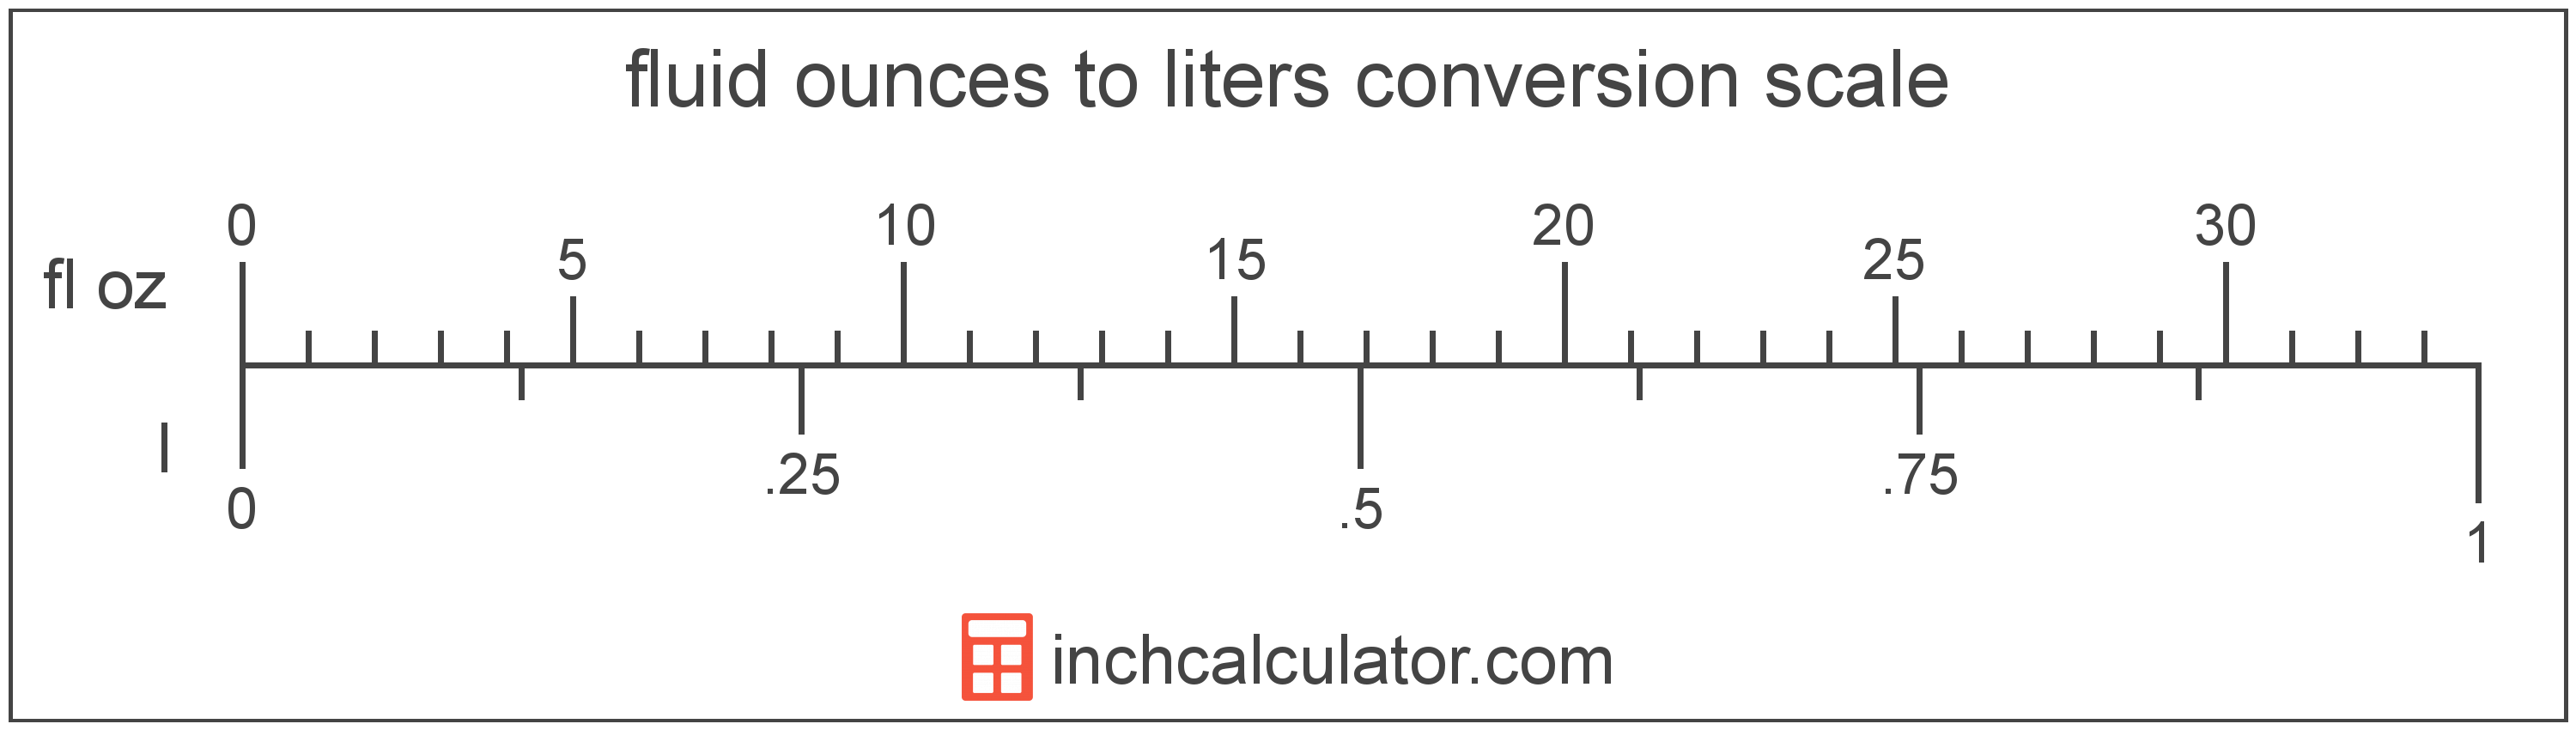 fluid-ounces-to-liters-conversion-fl-oz-to-l-inch-calculator